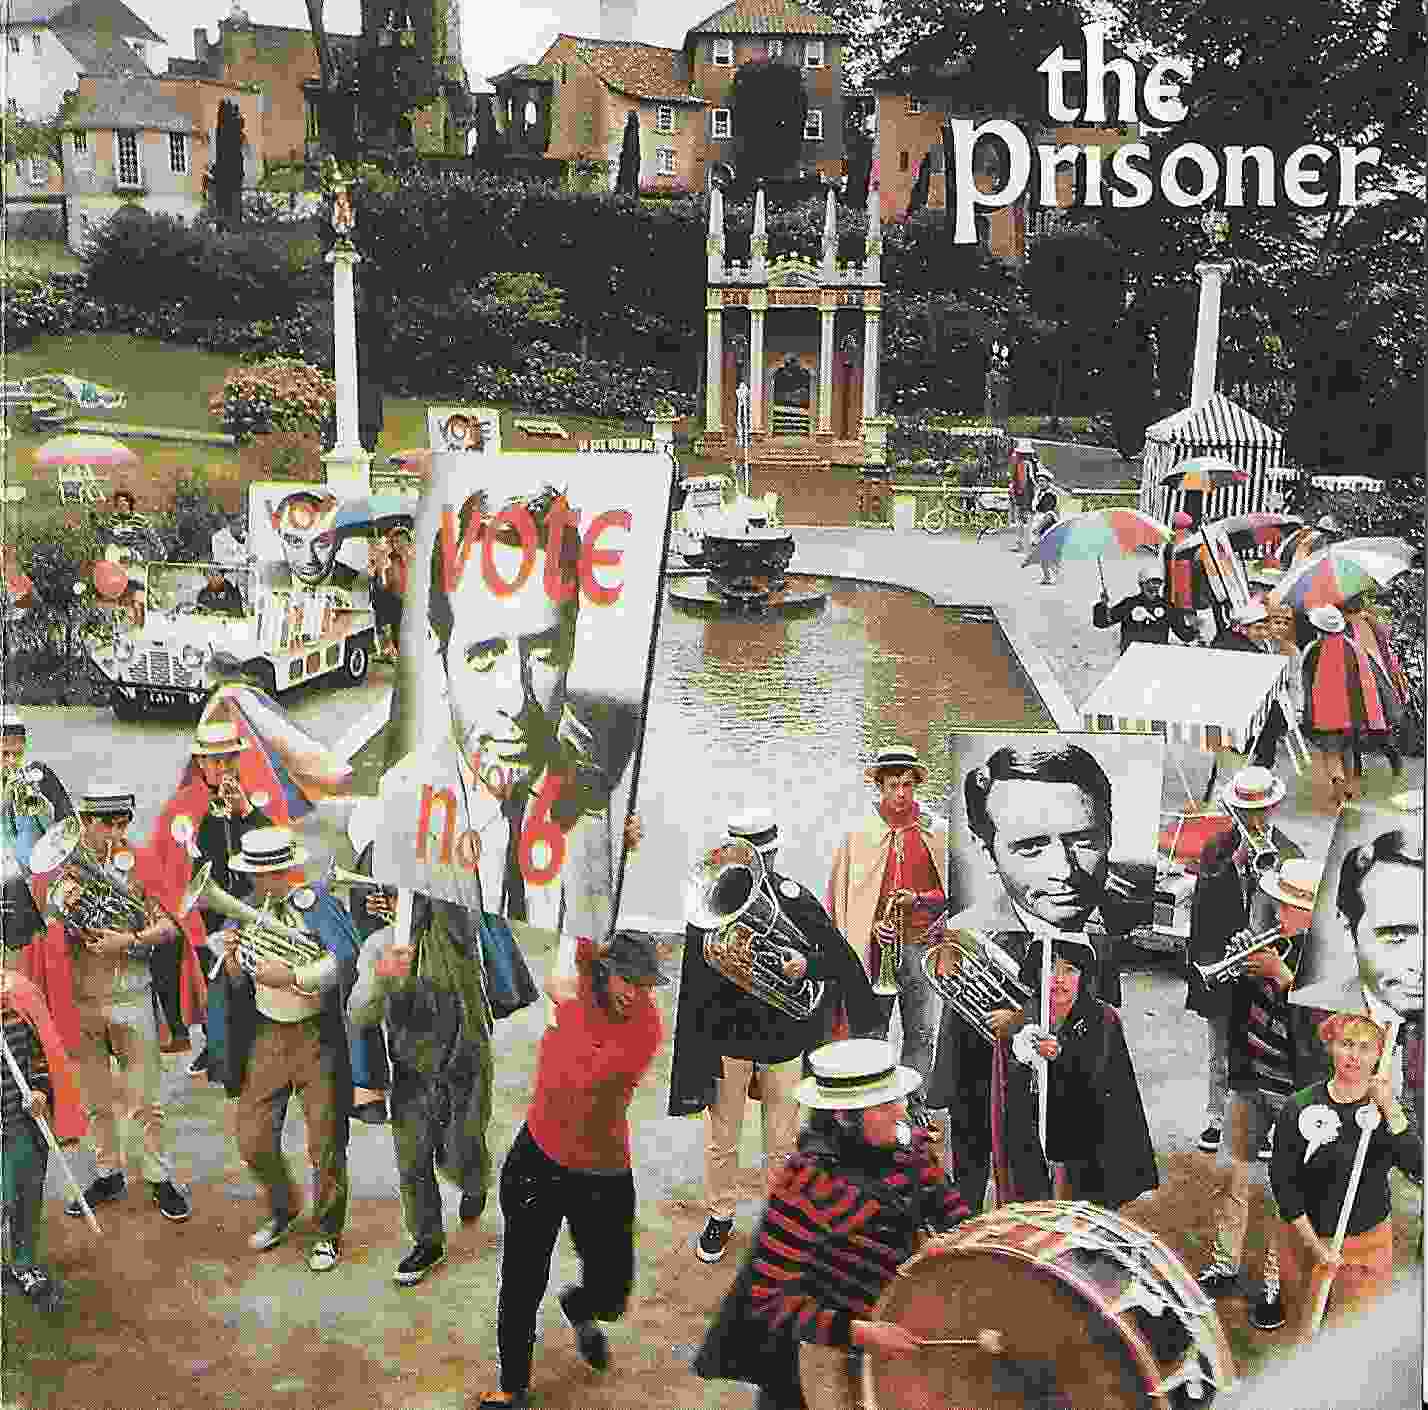 Picture of WEBA 066 CD The prisoner - Gatefold cover (Bootleg) by artist Various from ITV, Channel 4 and Channel 5 cds library